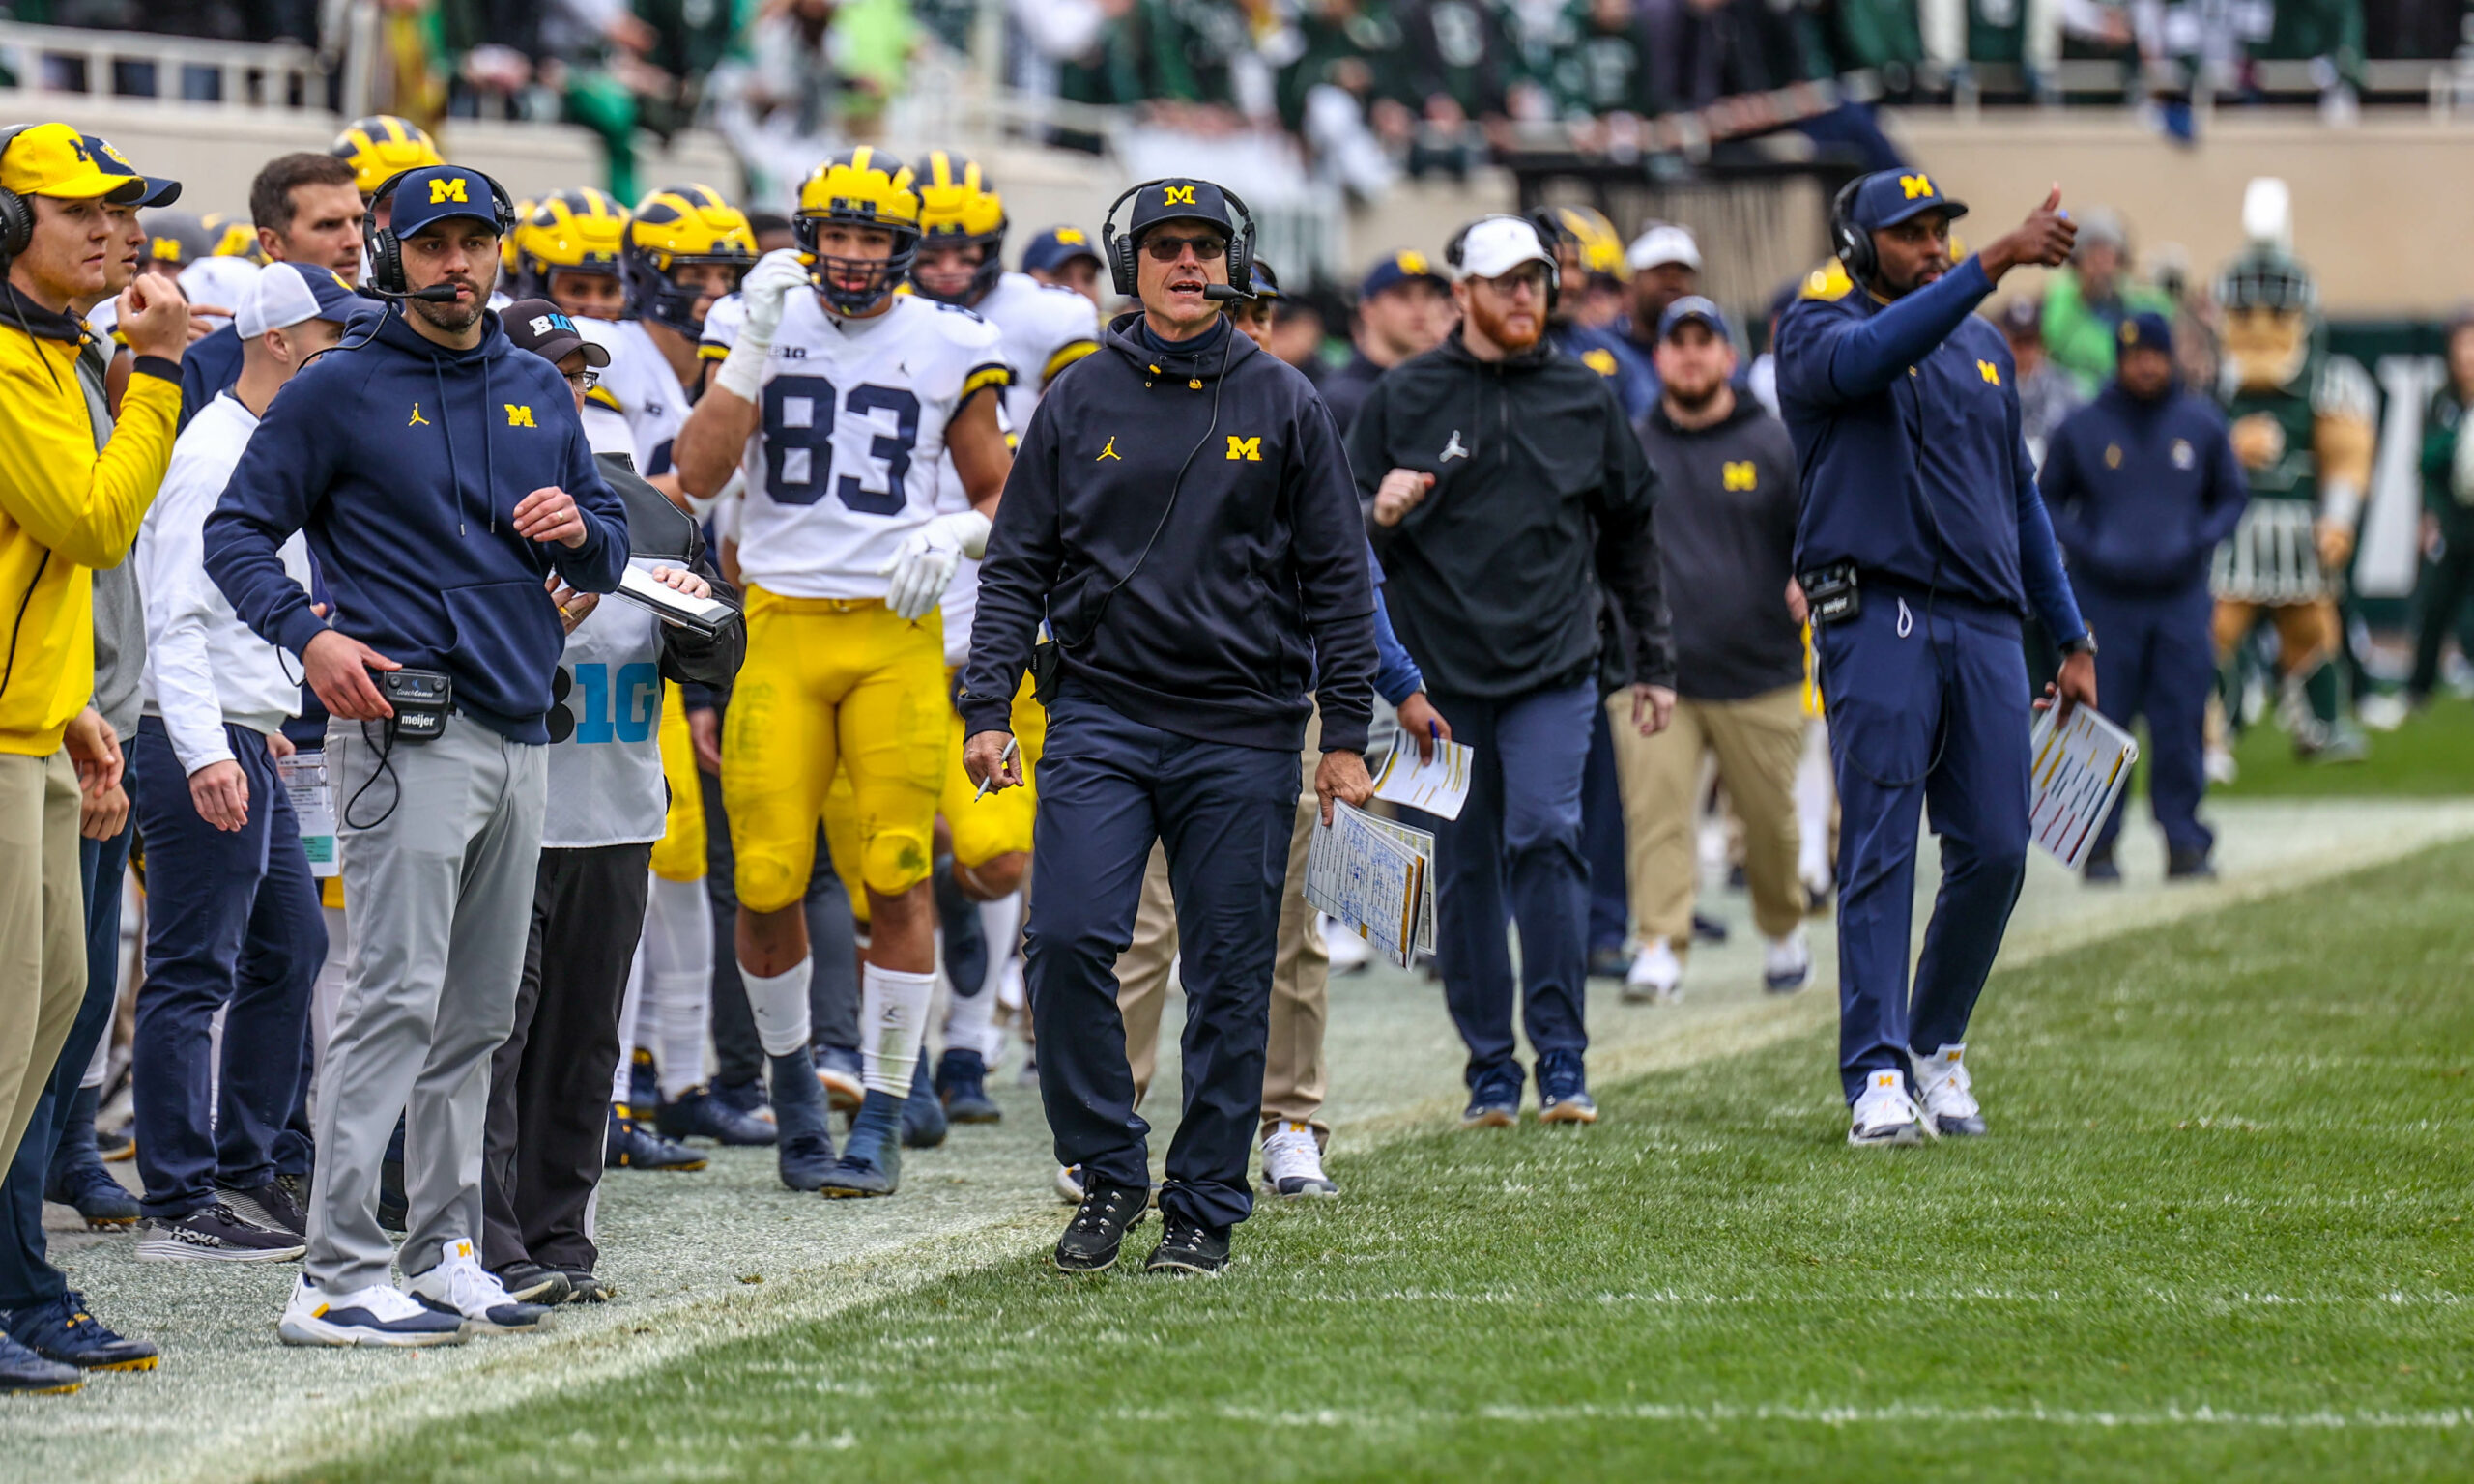 BTN’s Dave Revsine: ‘We were really blown away’ by Michigan football practice